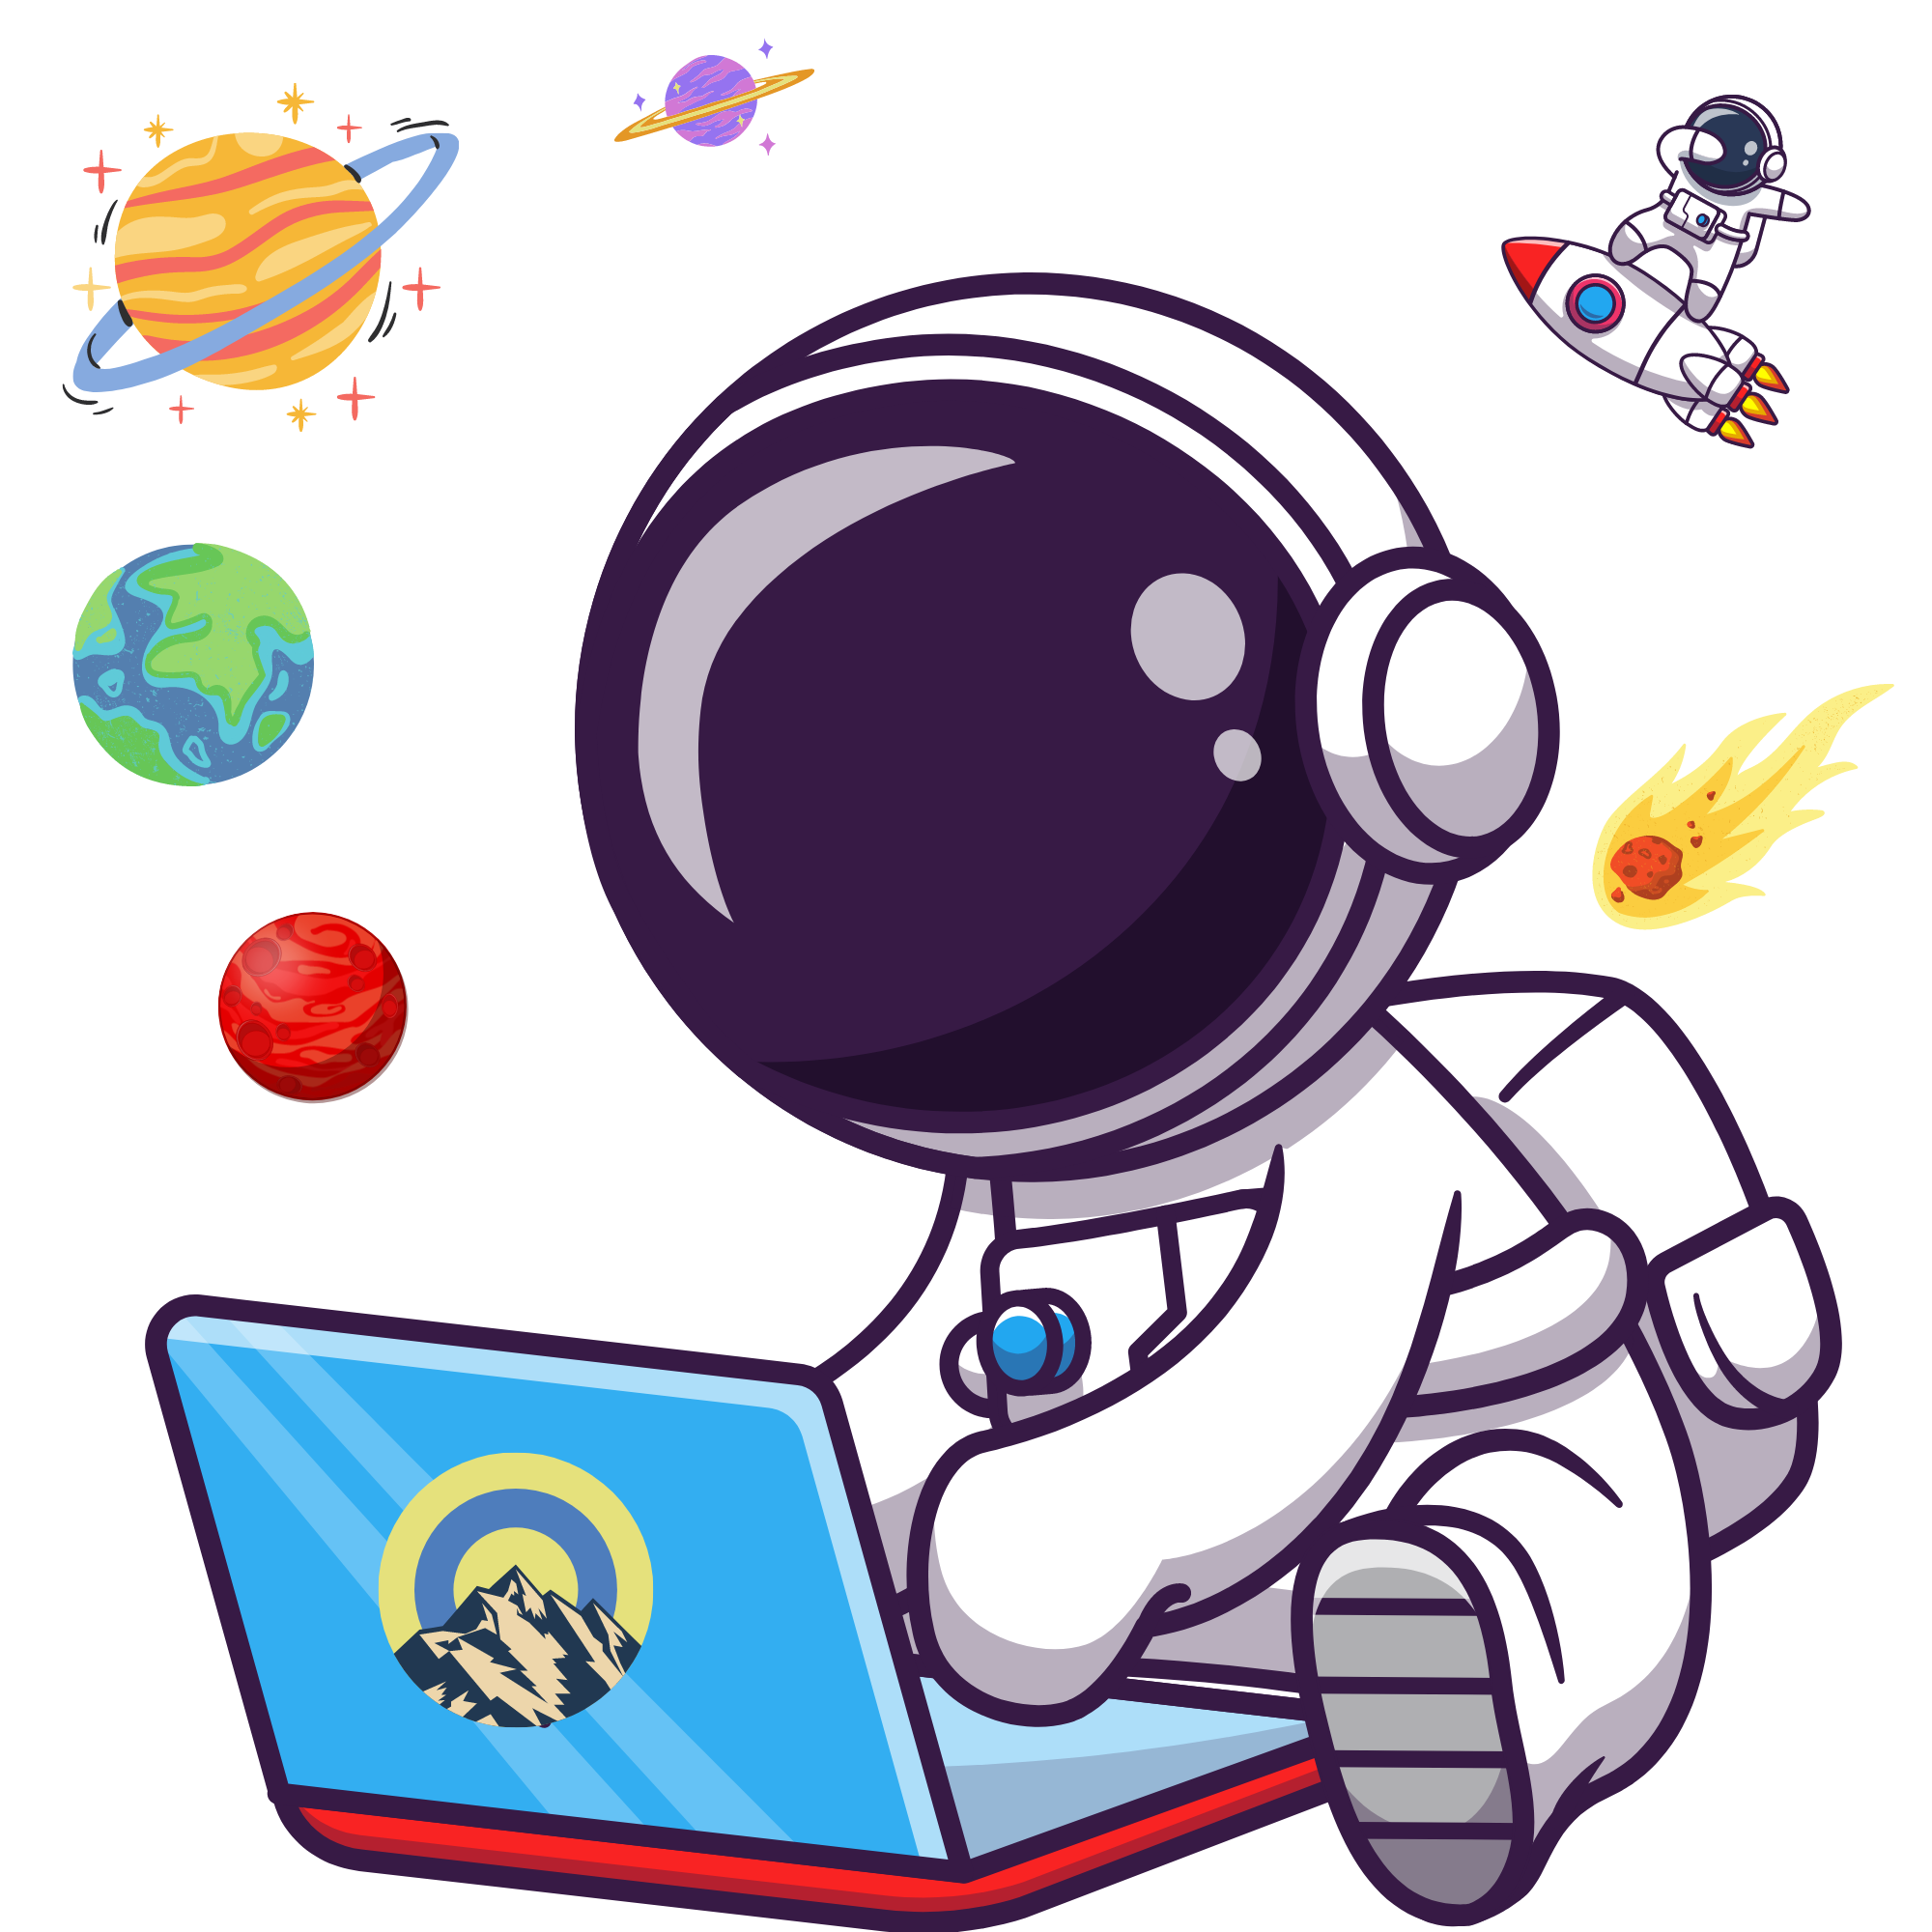 Astronaut With a Laptop And Planets Around Him